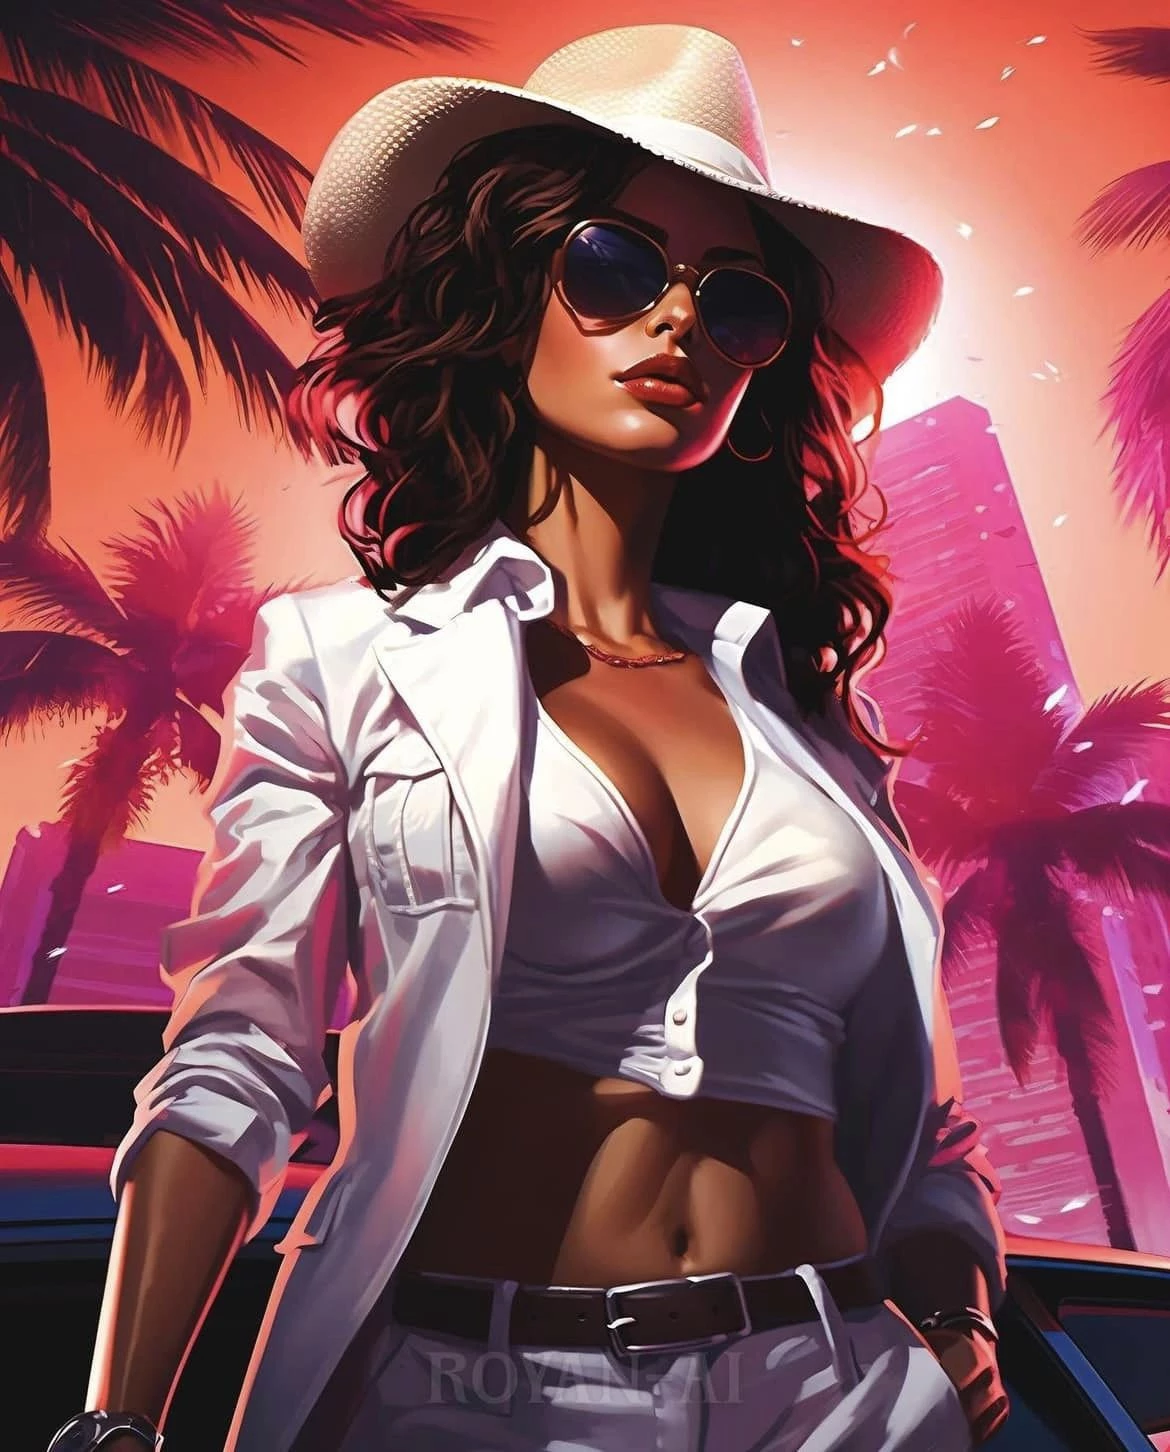 Lois Lane Looks Like Your Typical Miami Beach Girl